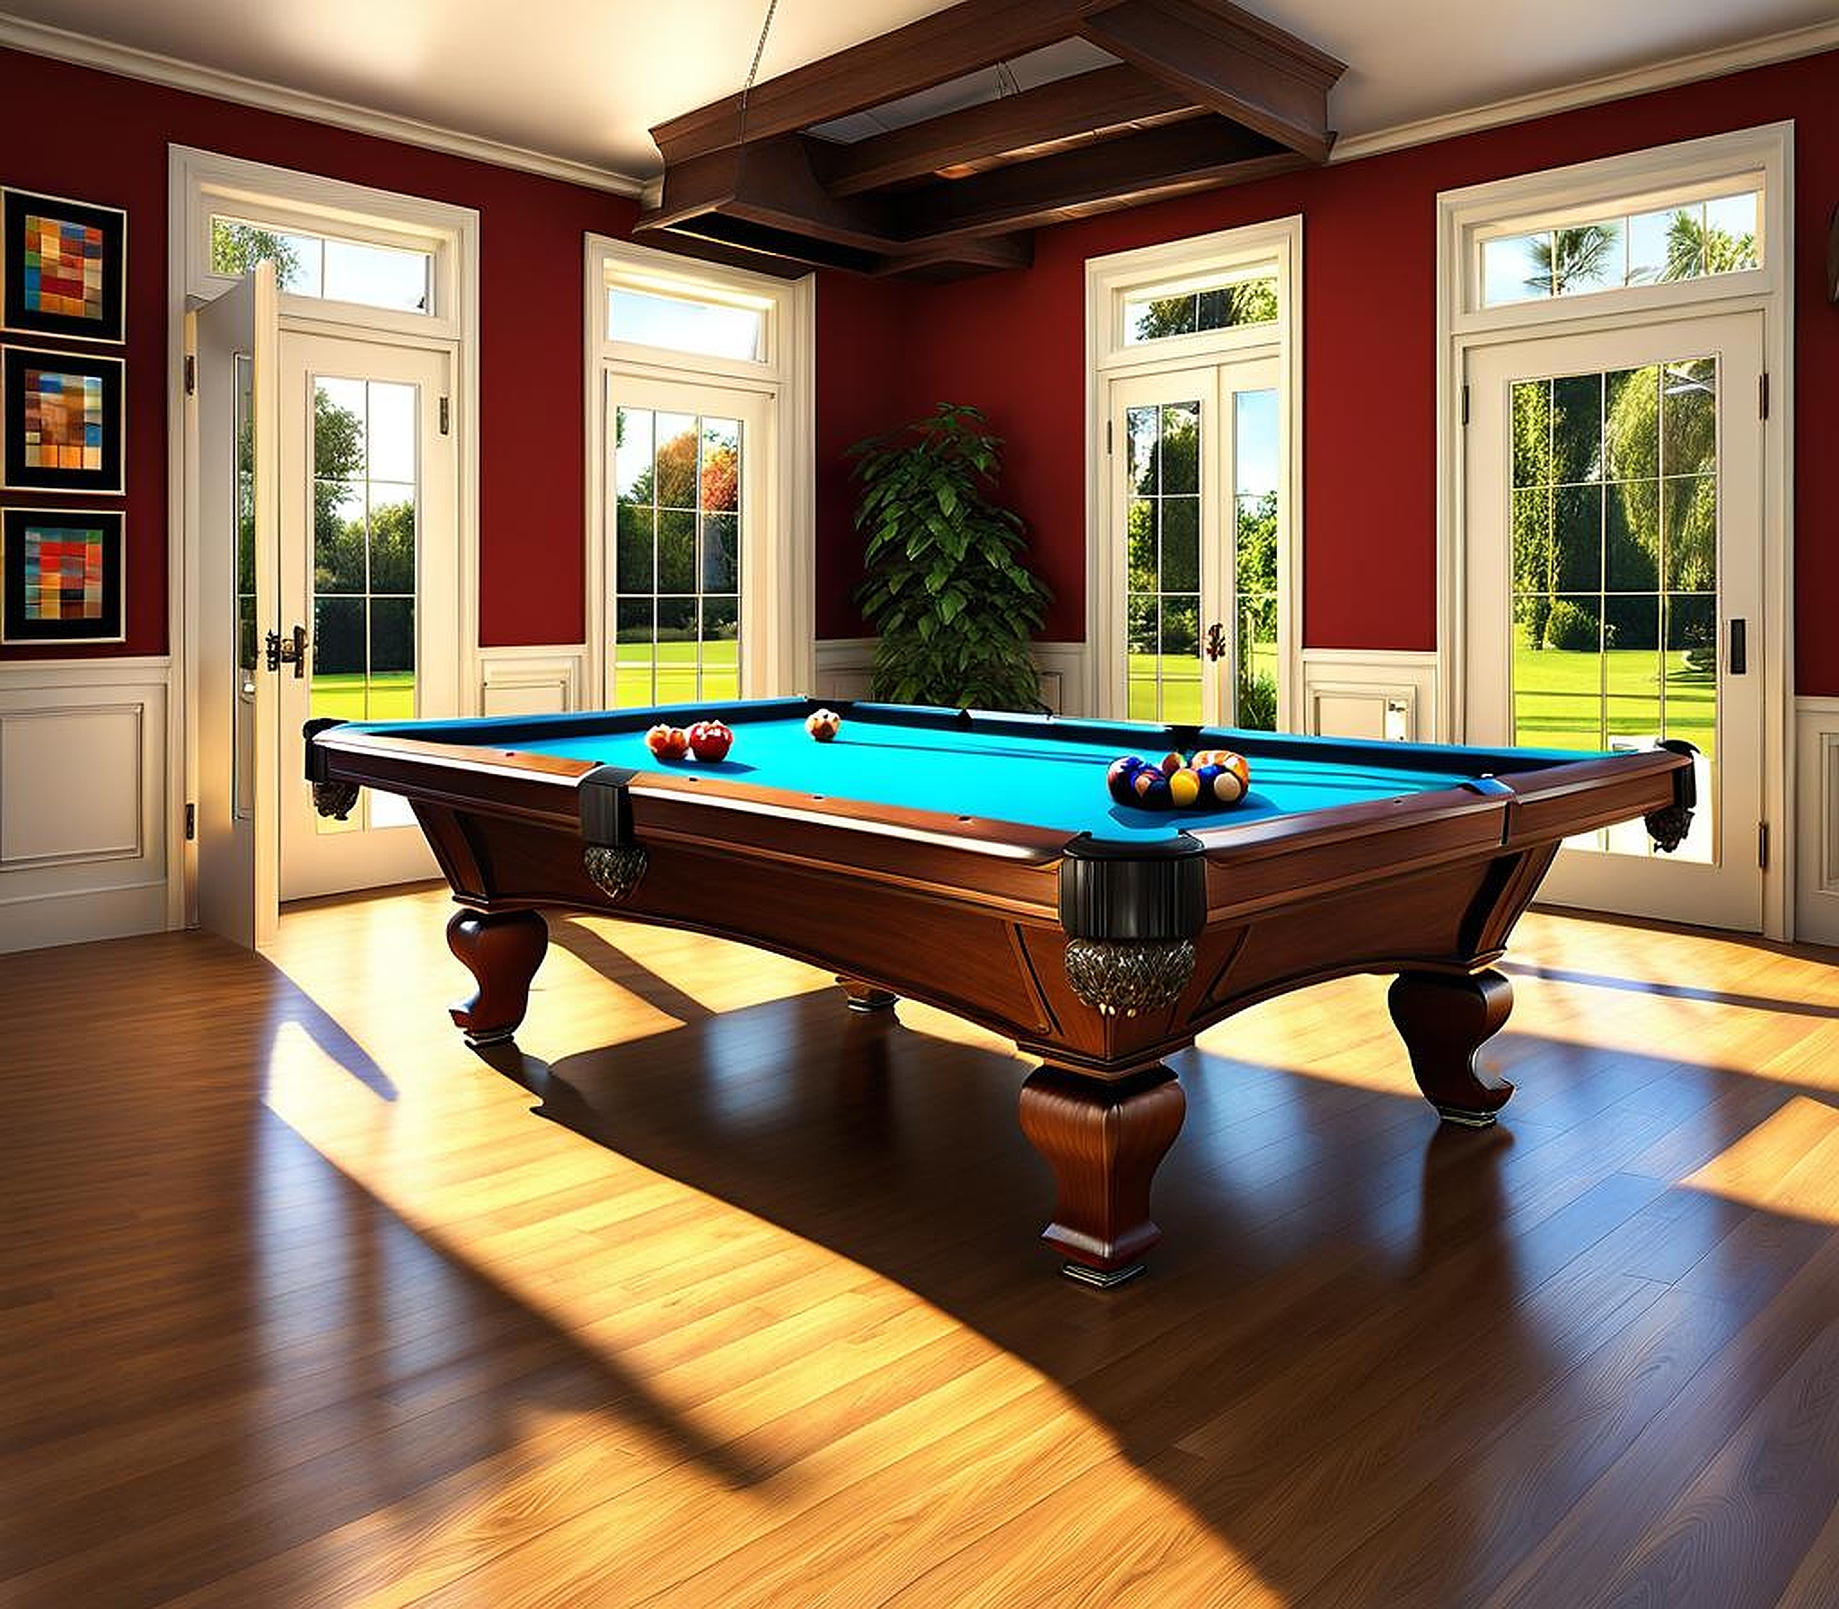 The Relation Between Pool Table Height from Floor and Room Architecture